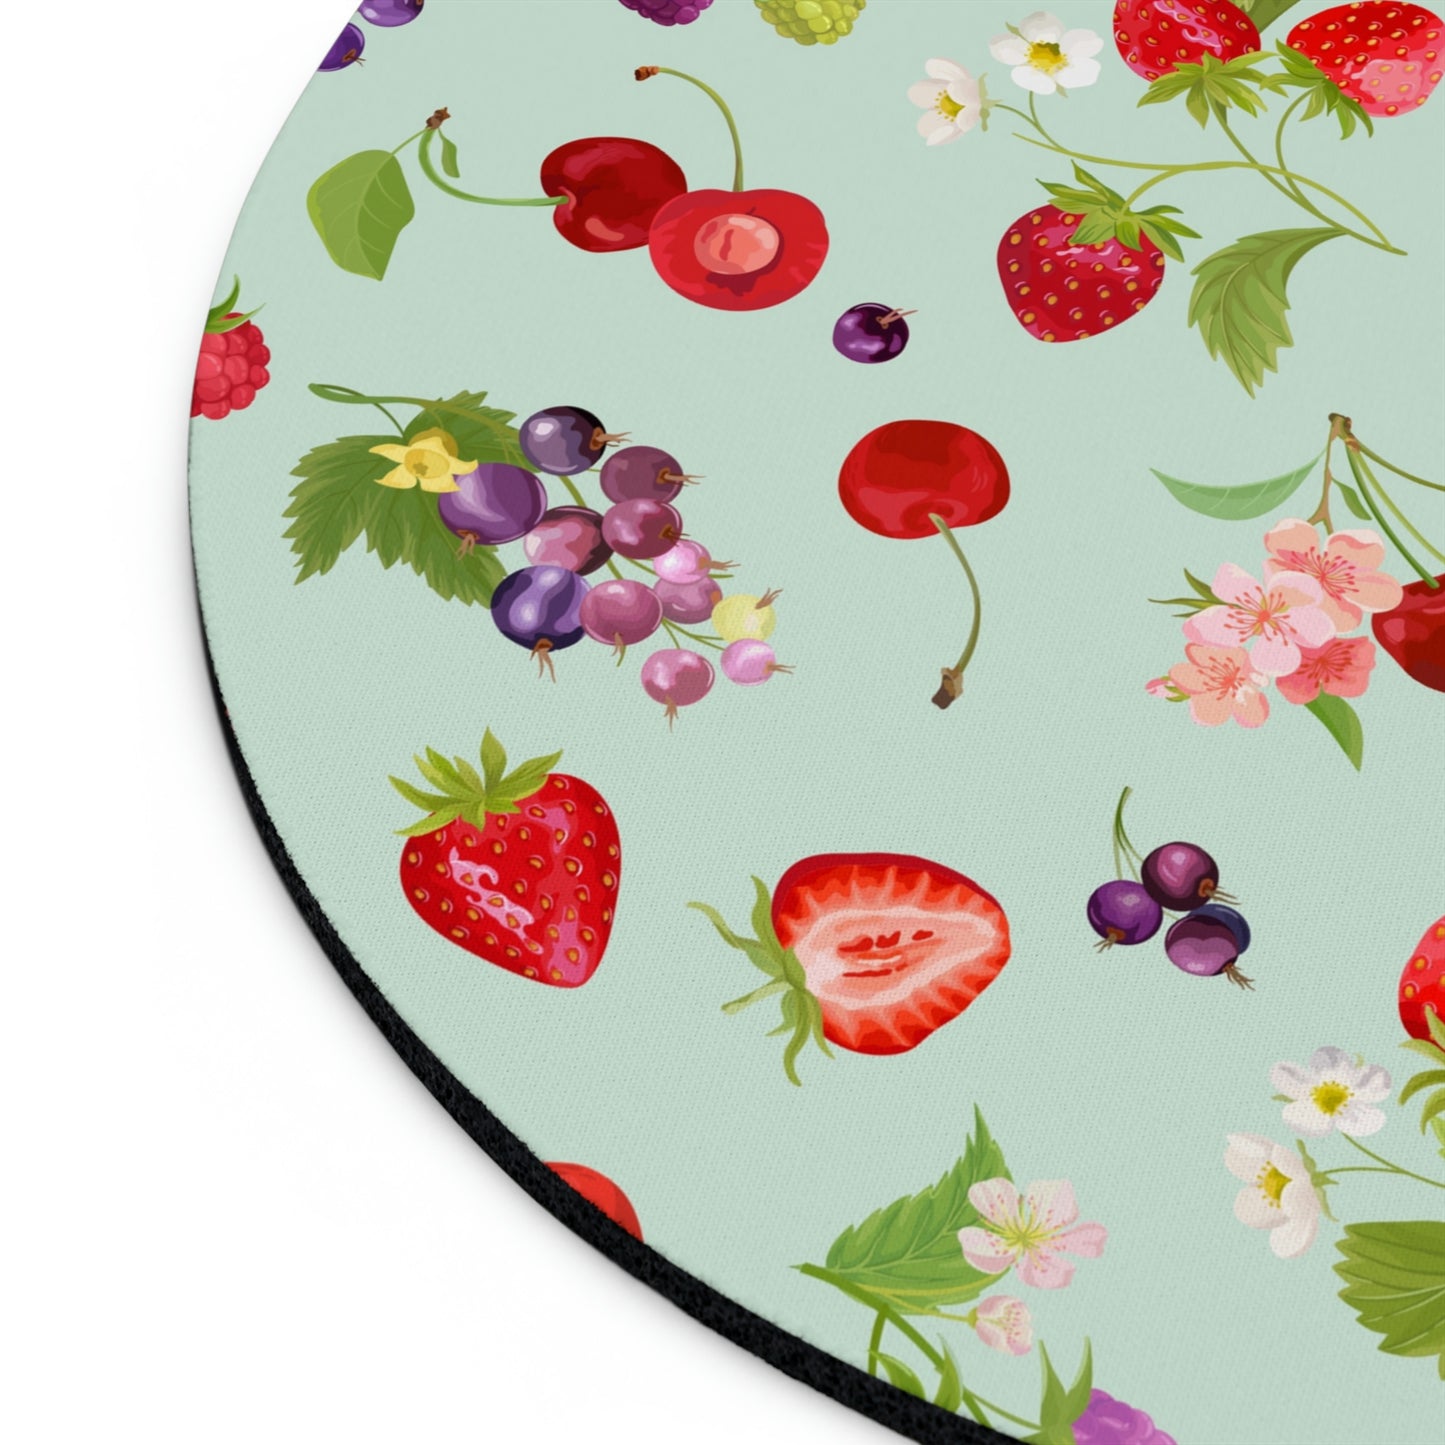 Cherries and Strawberries Mouse Pad